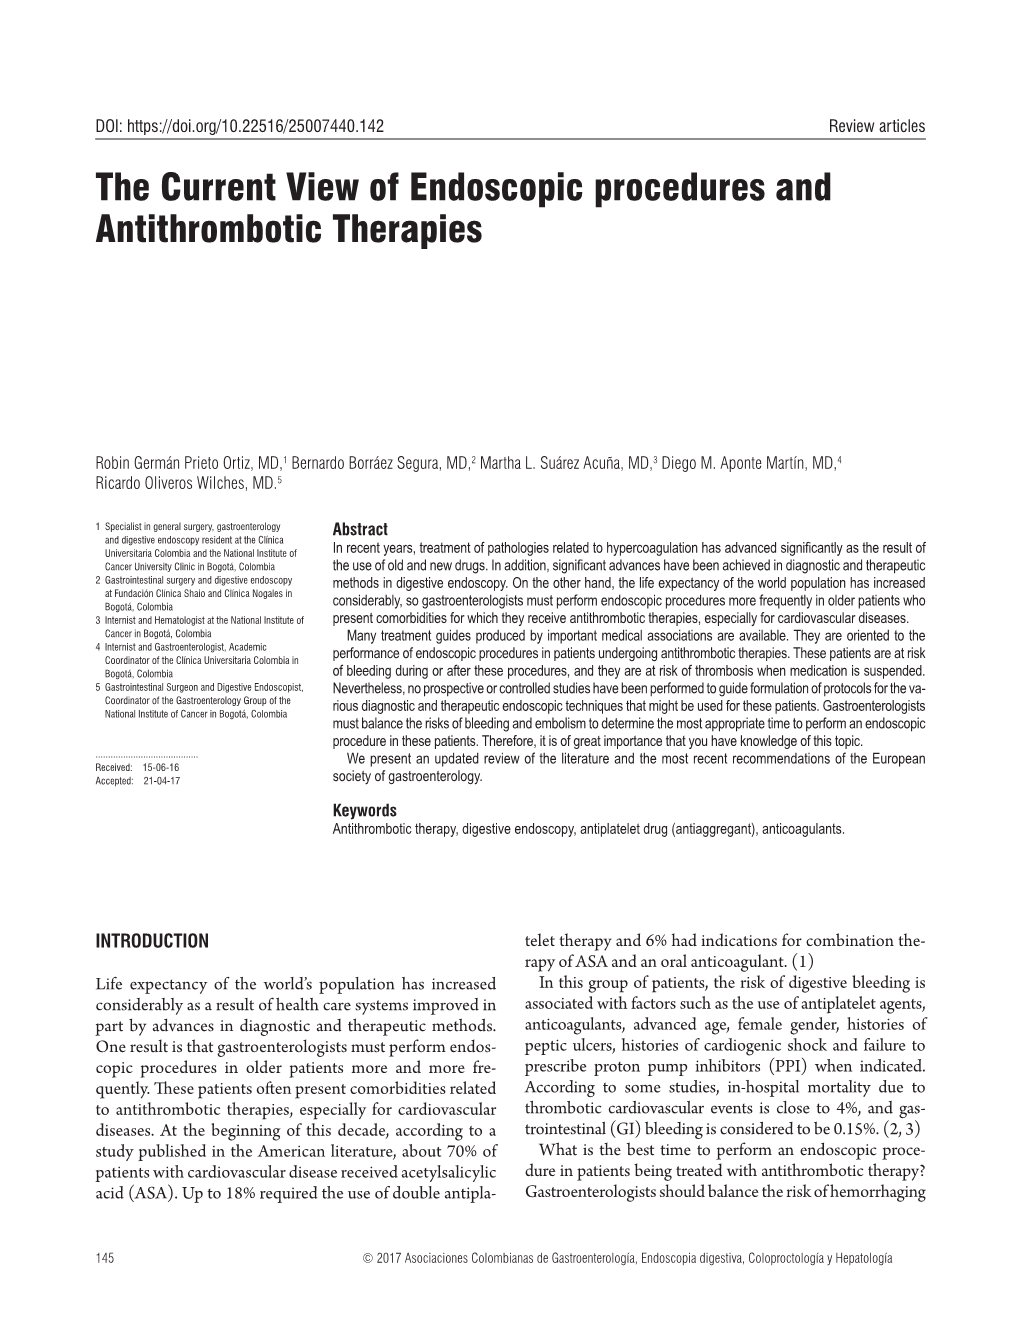 The Current View of Endoscopic Procedures and Antithrombotic Therapies